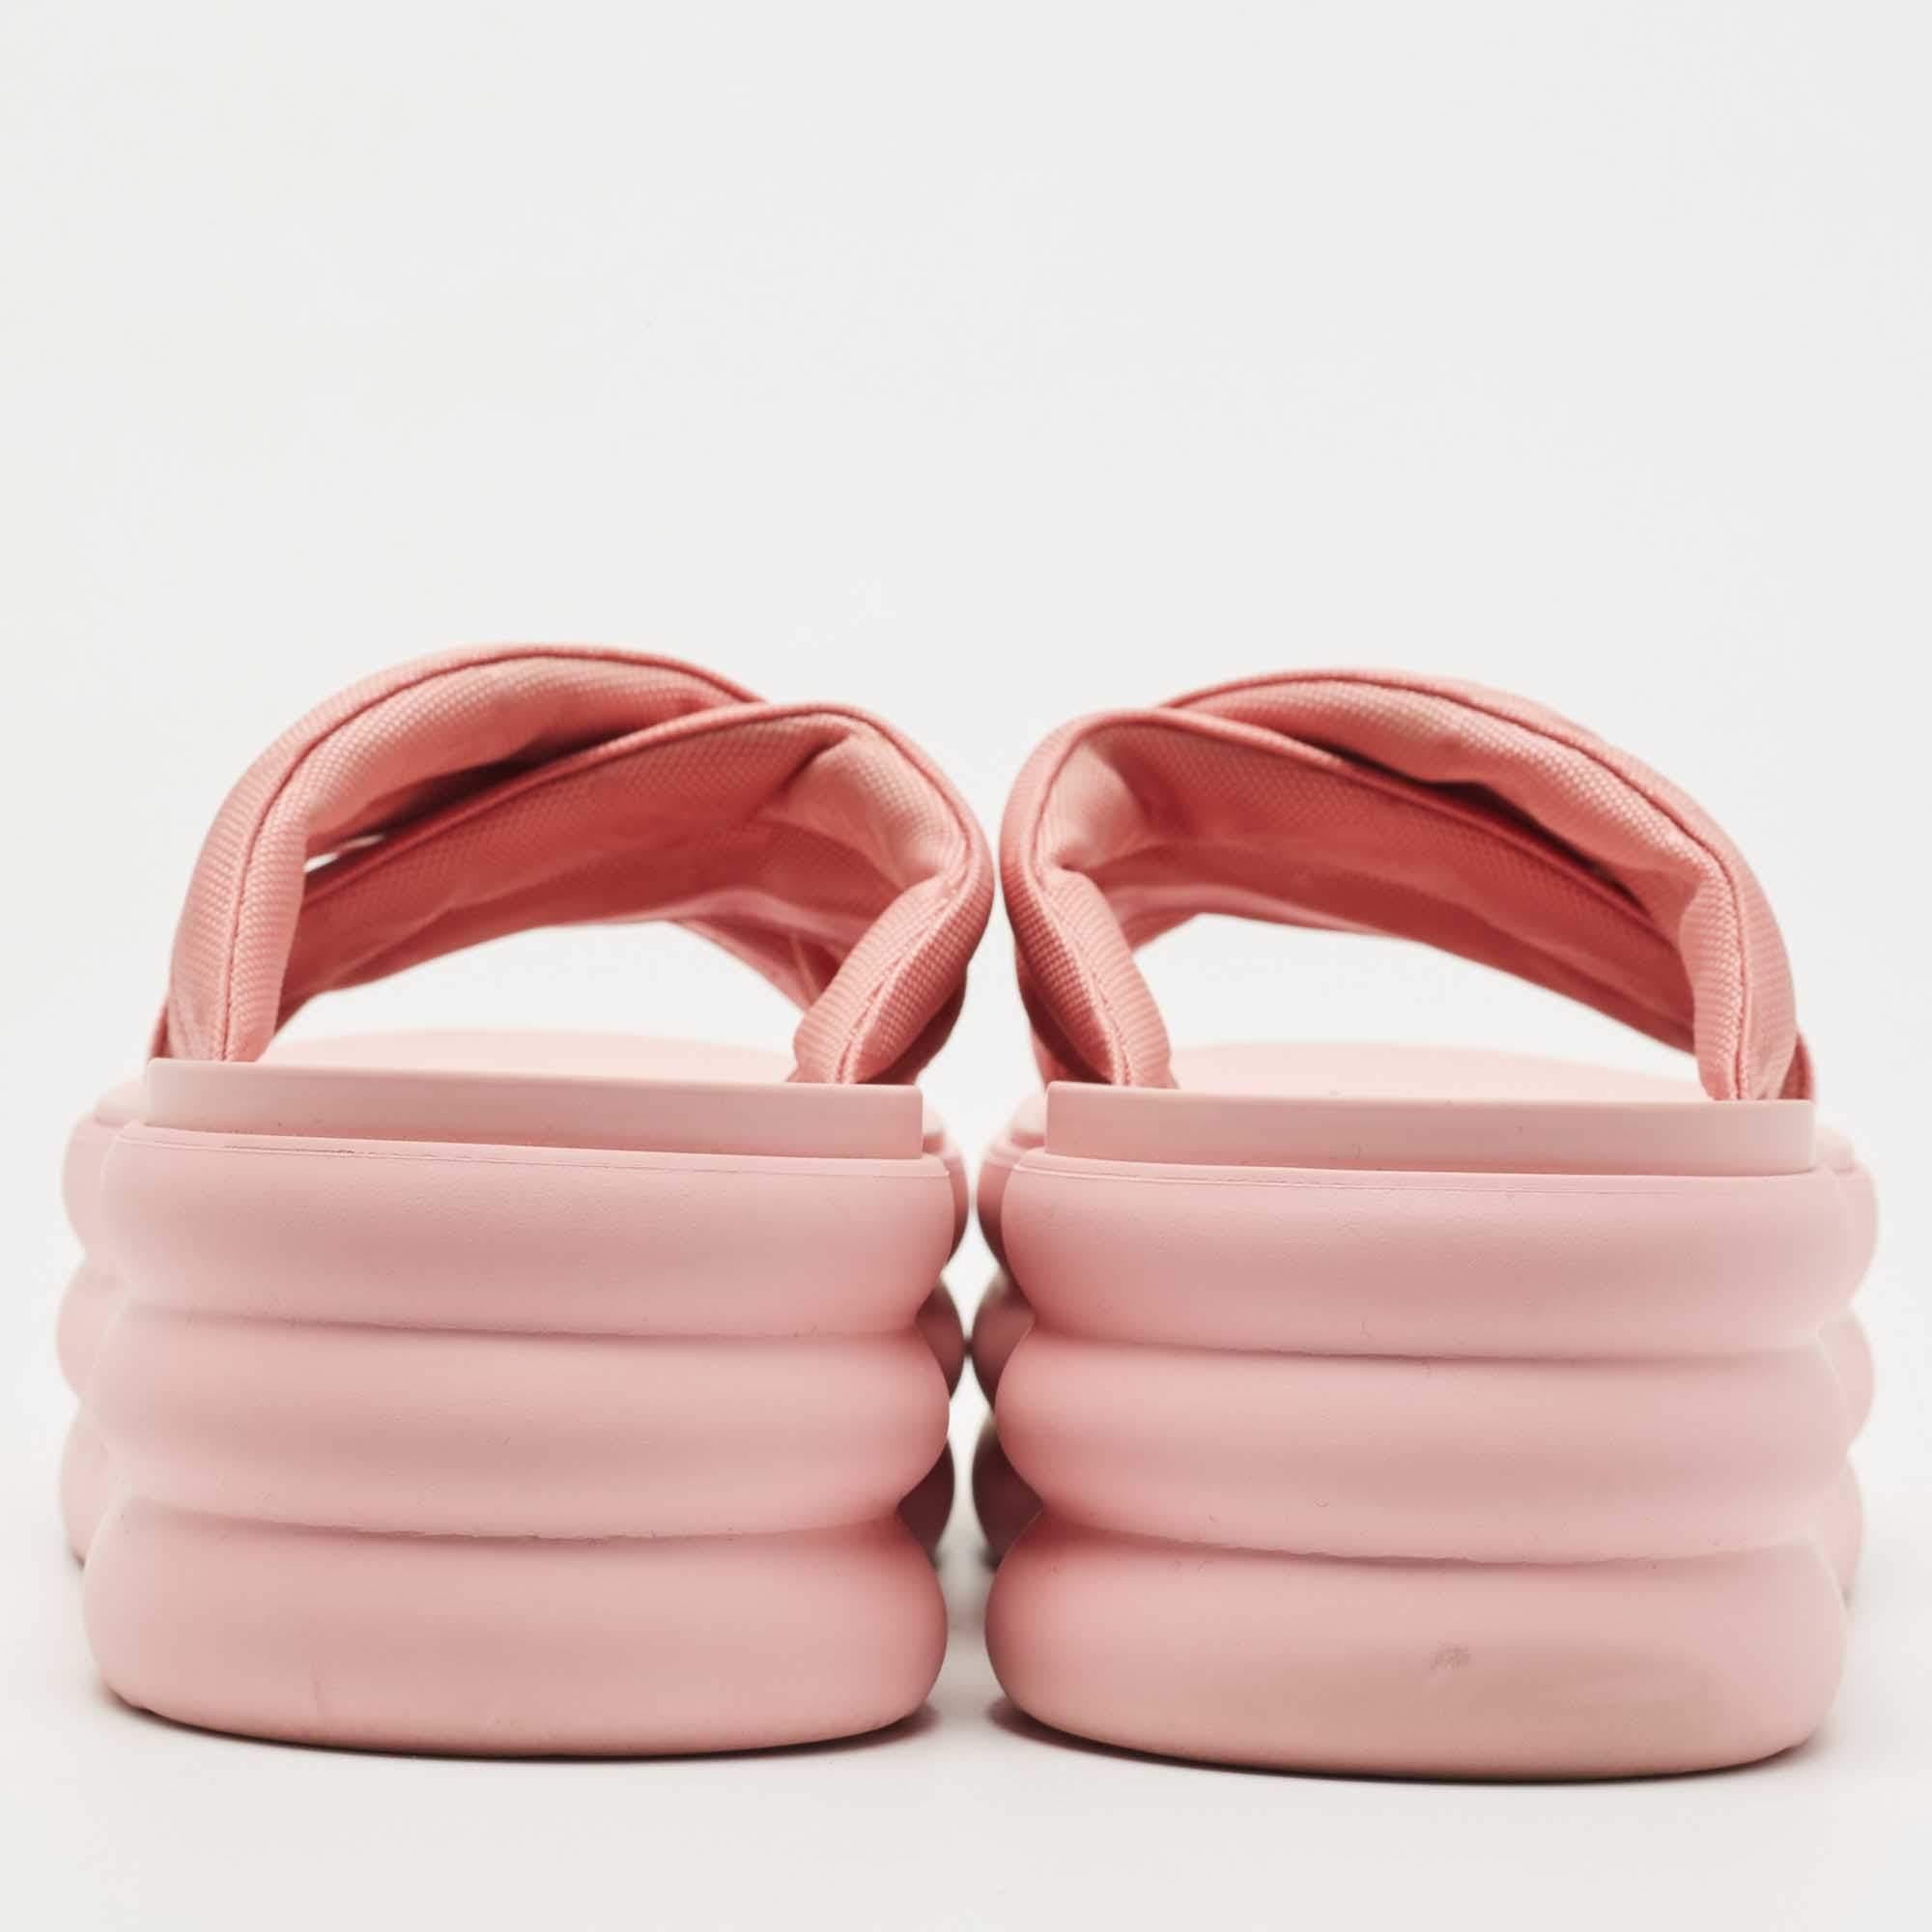 Enjoy the most fashionable days with these stylish platform slides from Gucci. Modern in design and craftsmanship, they are fashioned to keep you comfortable and chic!

